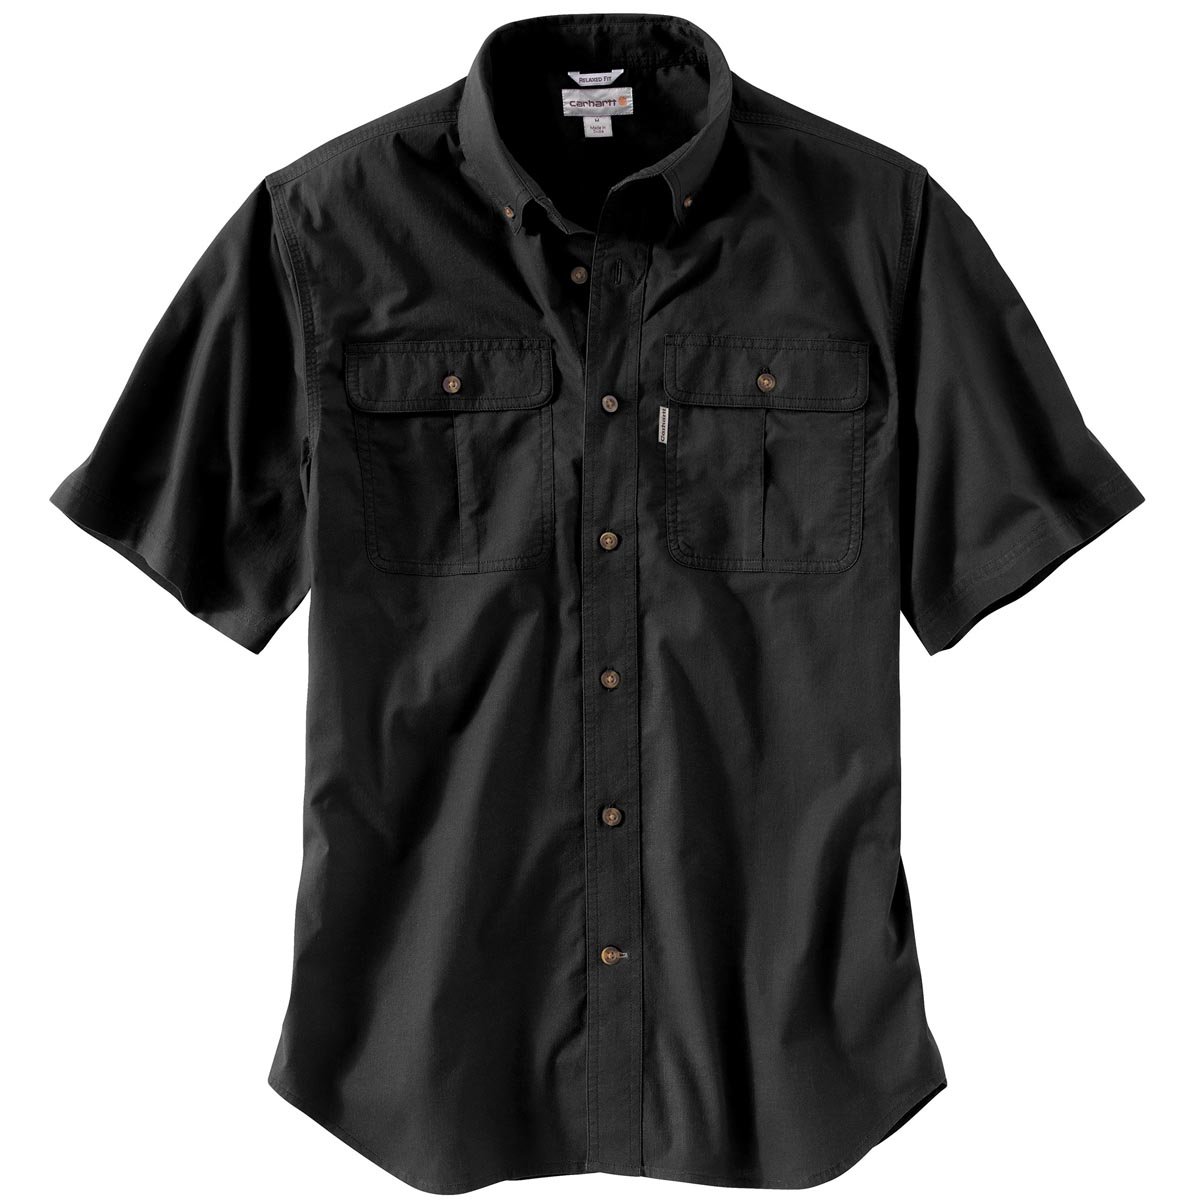 Carhartt Mens Short Sleeve Solid Work Shirt Discontinued Pricing